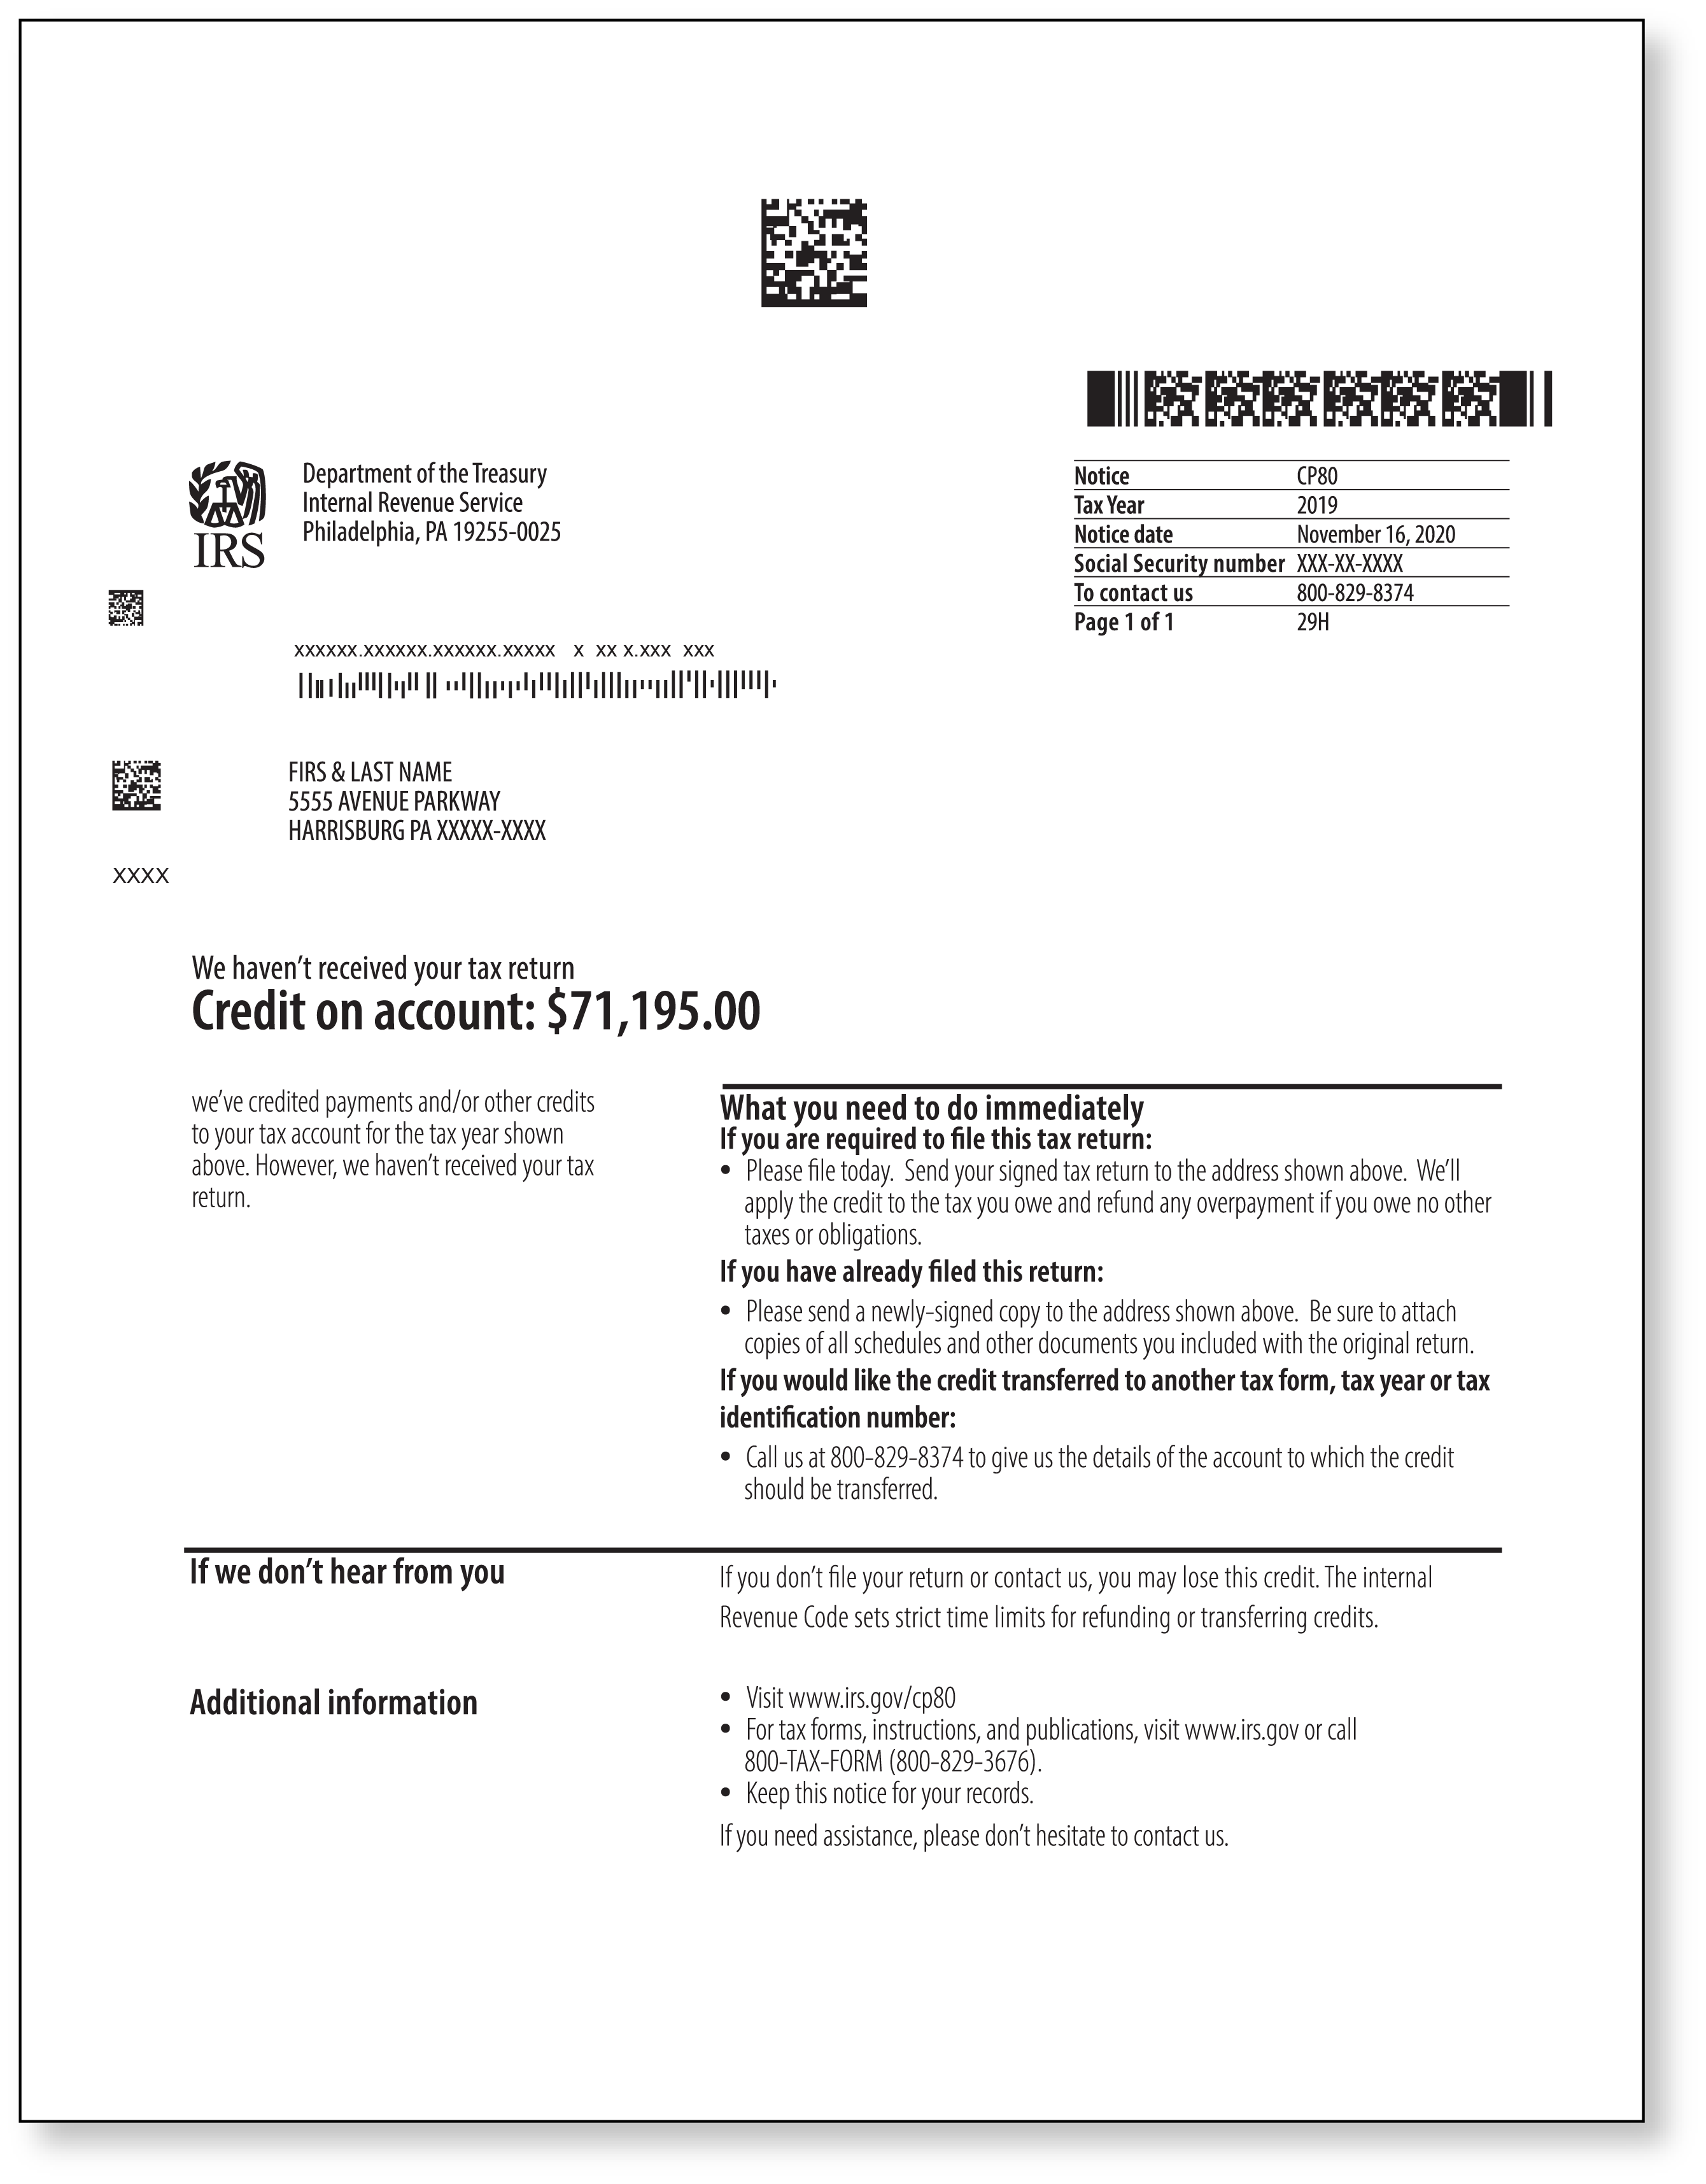 IRS Audit Letter CP80 – Sample 1